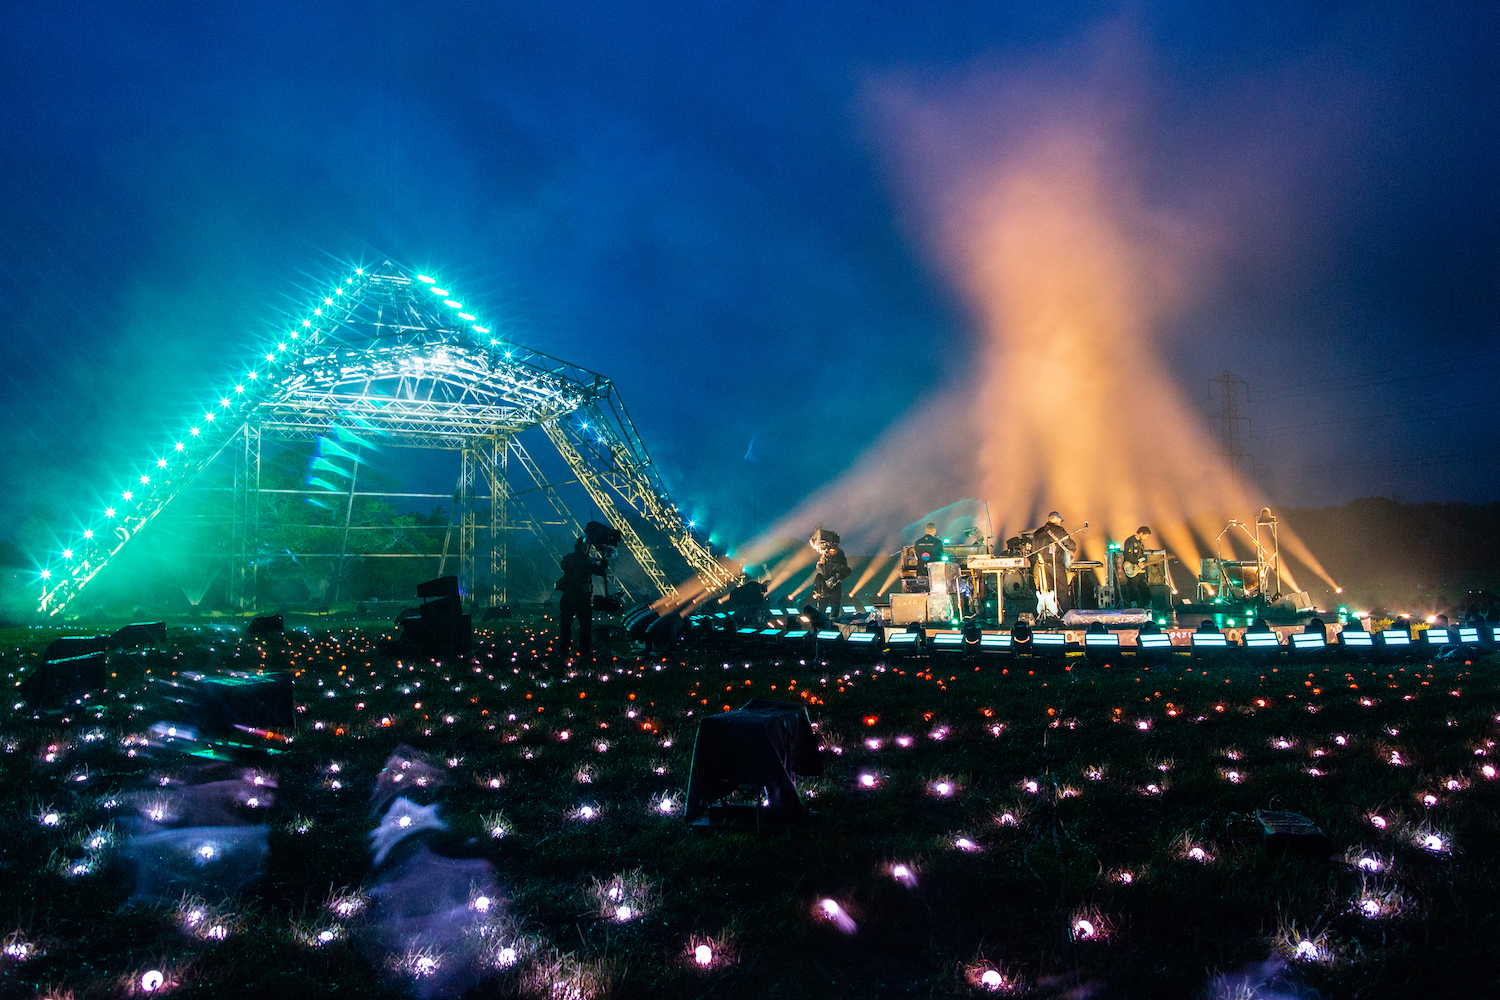 Glastonbury Festival’s live stream is an exemplary exercise in bringing atmosphere to the screen